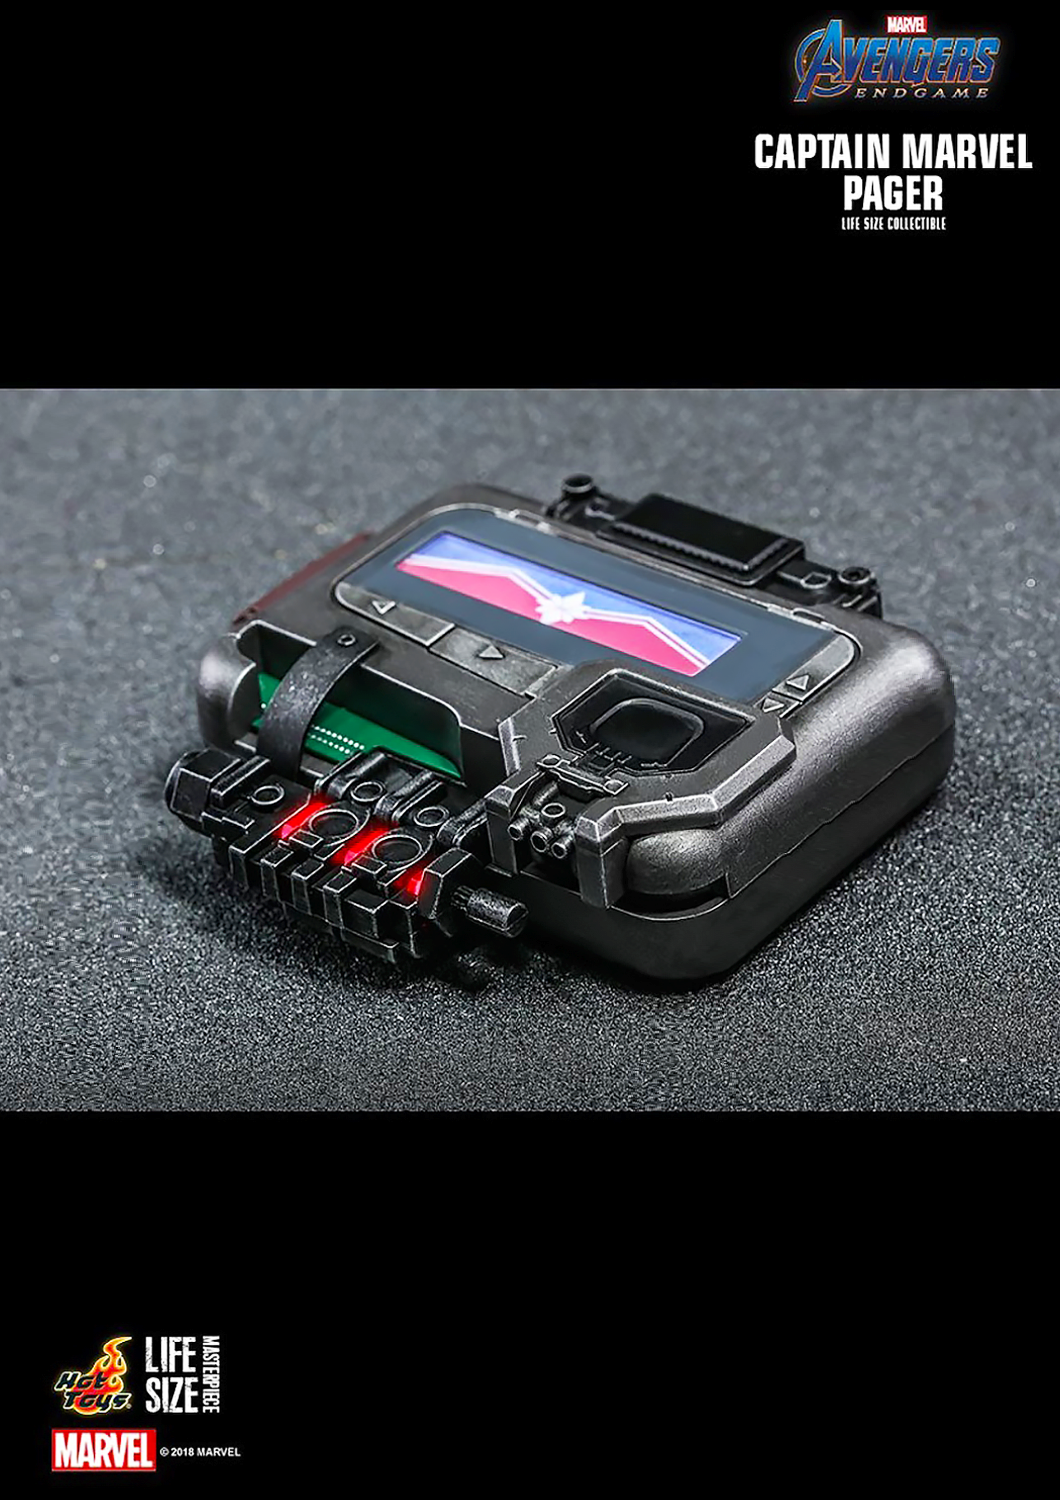 HOT TOYS MARVEL  AVENGER ENDGAME CAPTAIN MARVEL PAGER LIFE-SIZE COLLECTIBLE LMS009 1/1 - Anotoys Collectibles